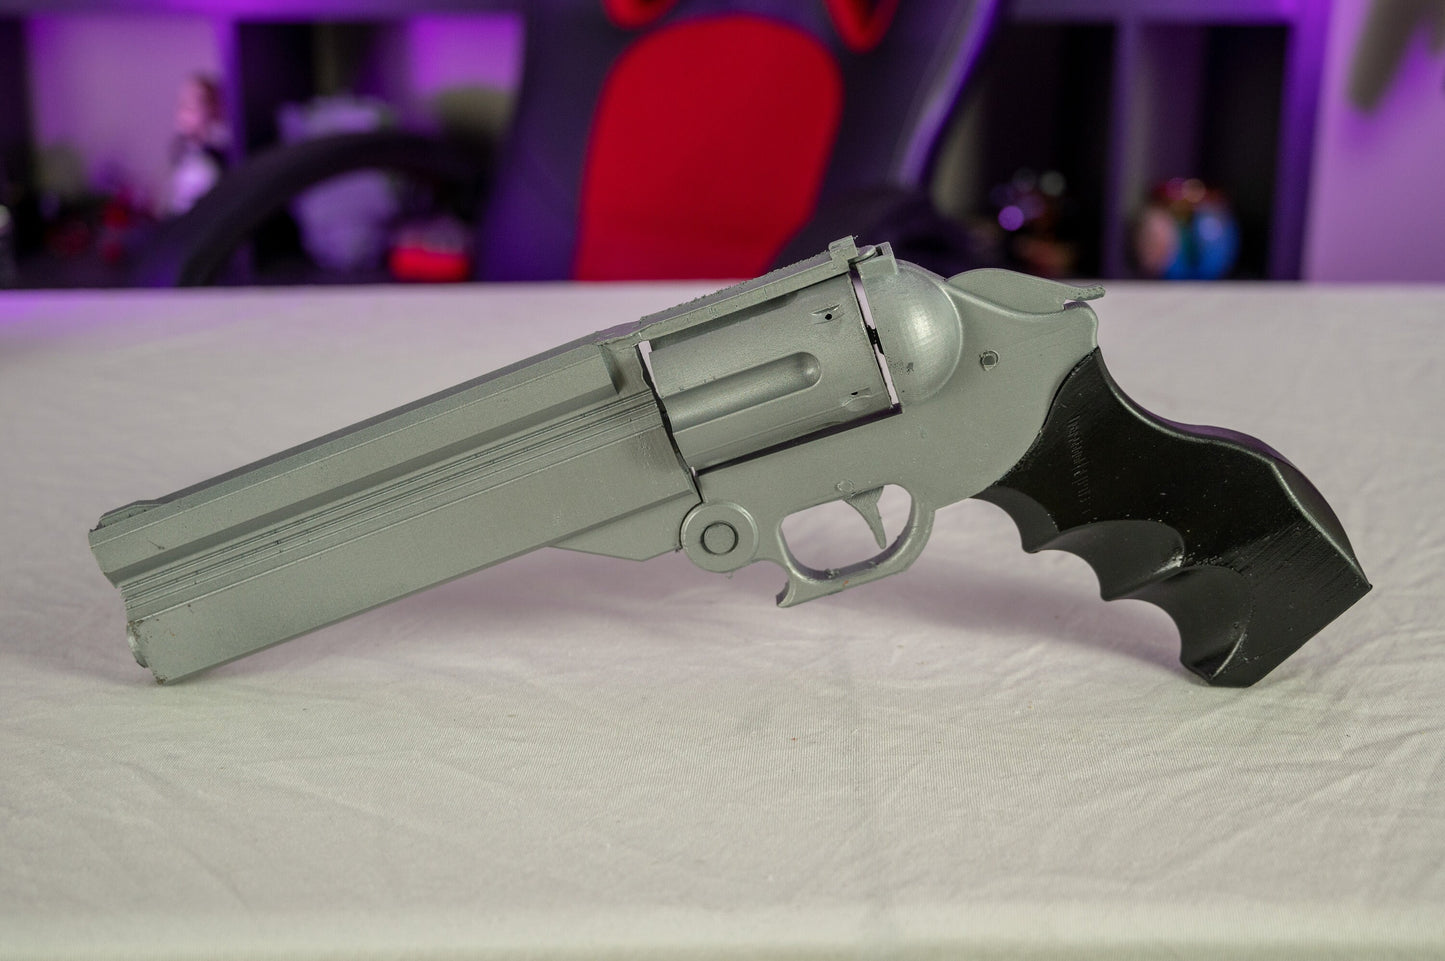 Vash and Knives Prop Blaster TOY NOT REAL Replica Colt .45 Cosplay Anime Video Game Prop For Cosplay